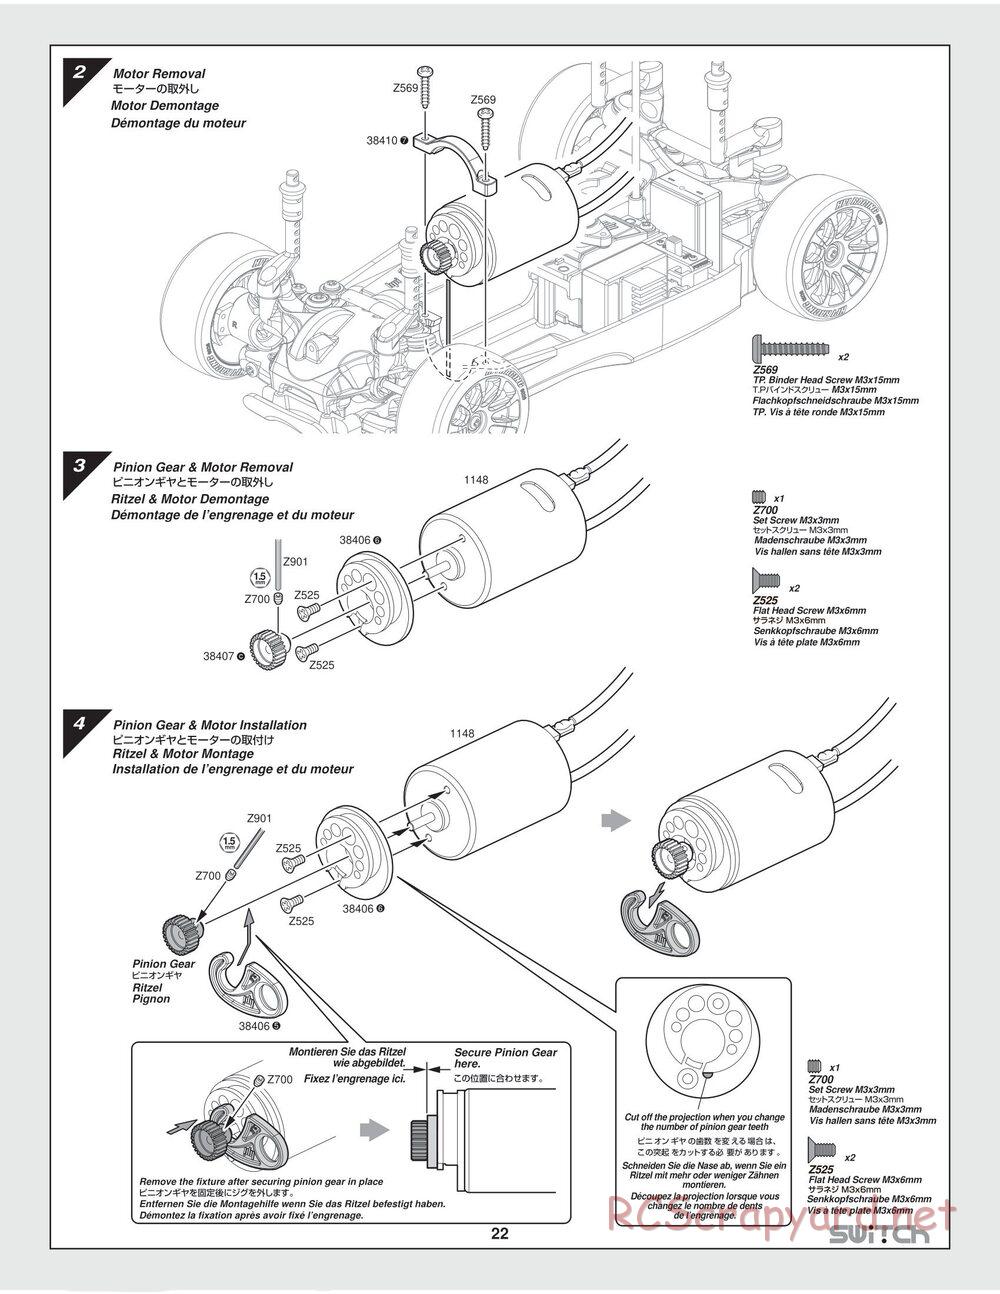 HPI - Switch - Manual - Page 22